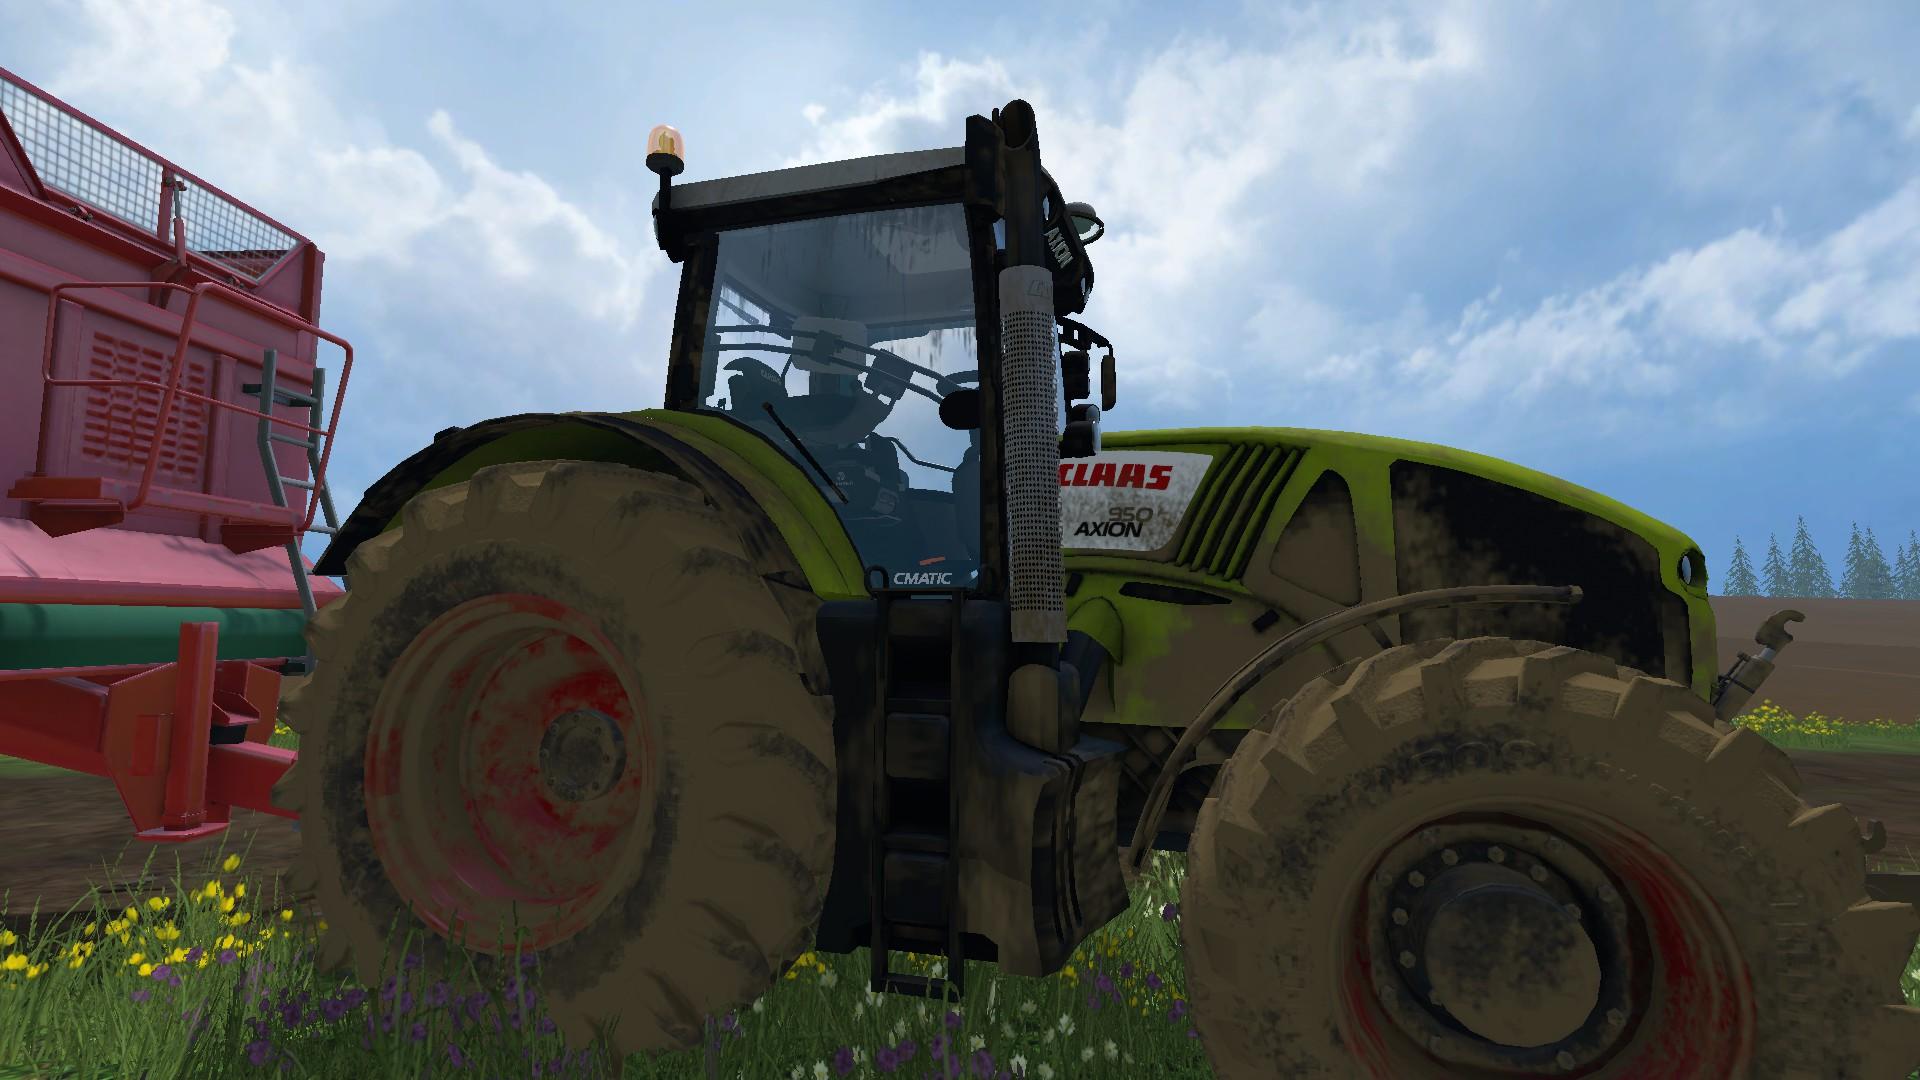 Claas Axion Tractor Backgrounds, Compatible - PC, Mobile, Gadgets| 1920x1080 px